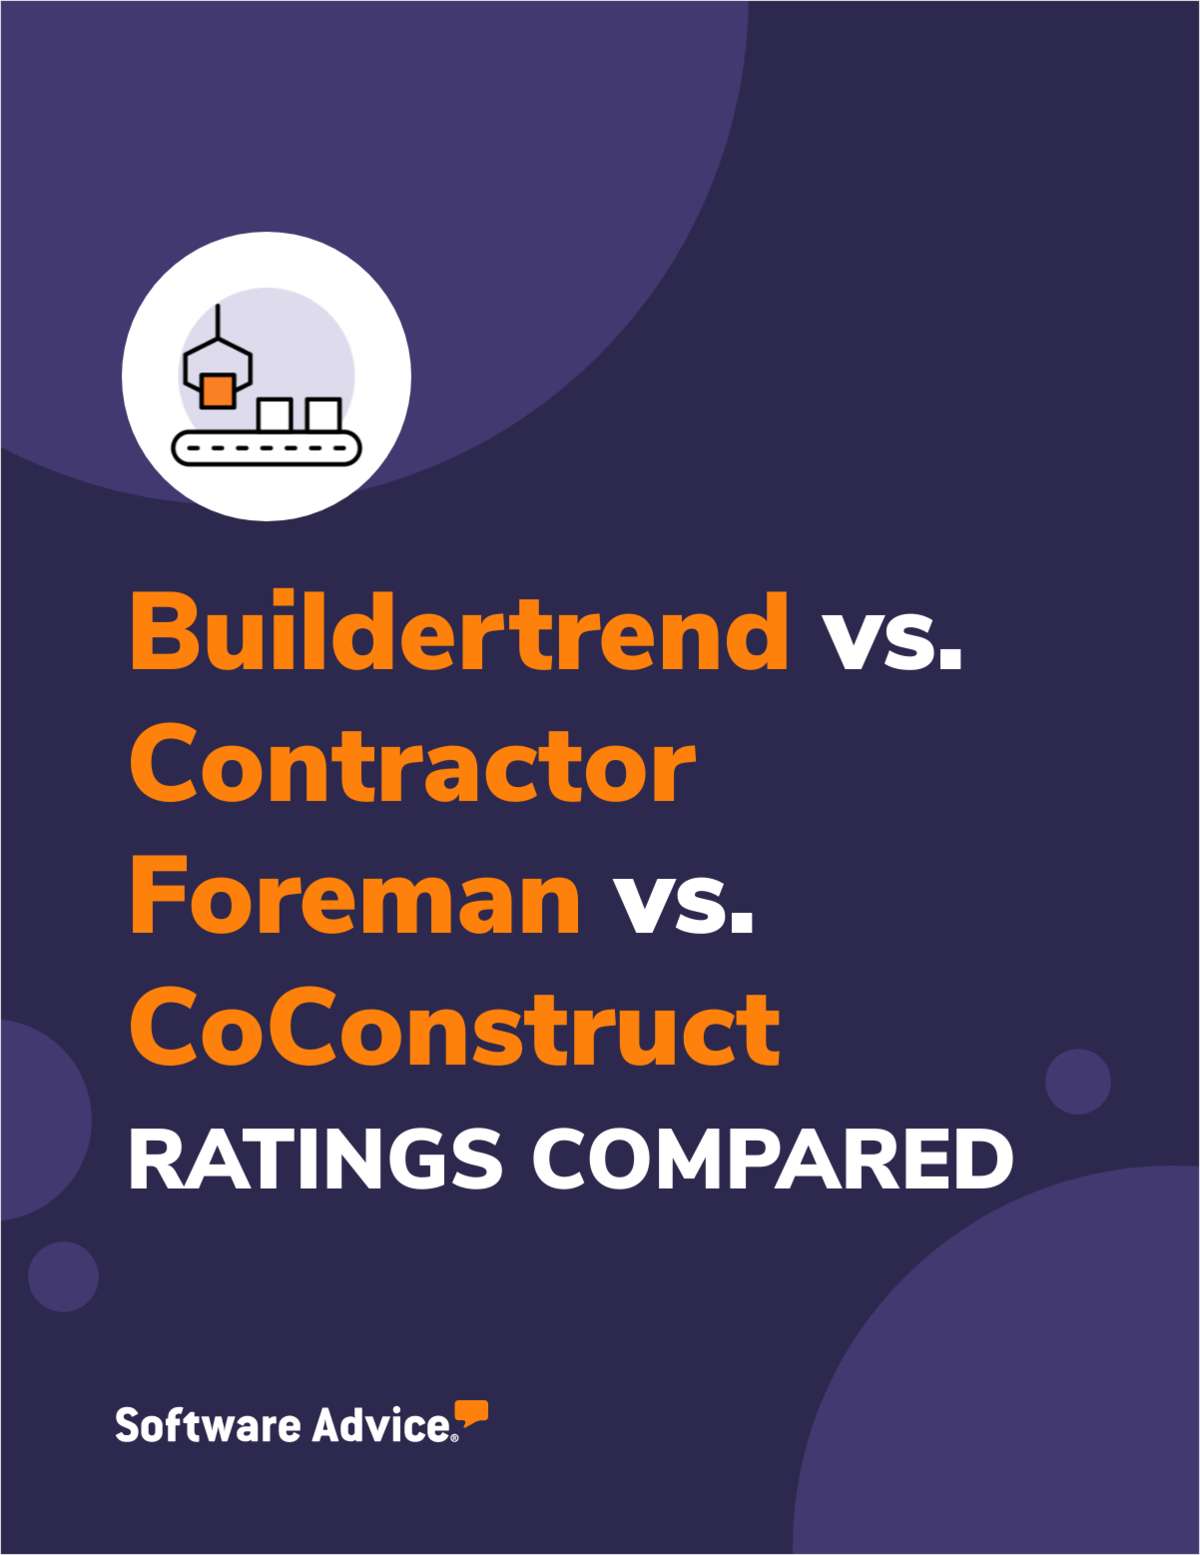 Buildertrend vs Contractor Foreman vs CoConstruct Ratings Compared